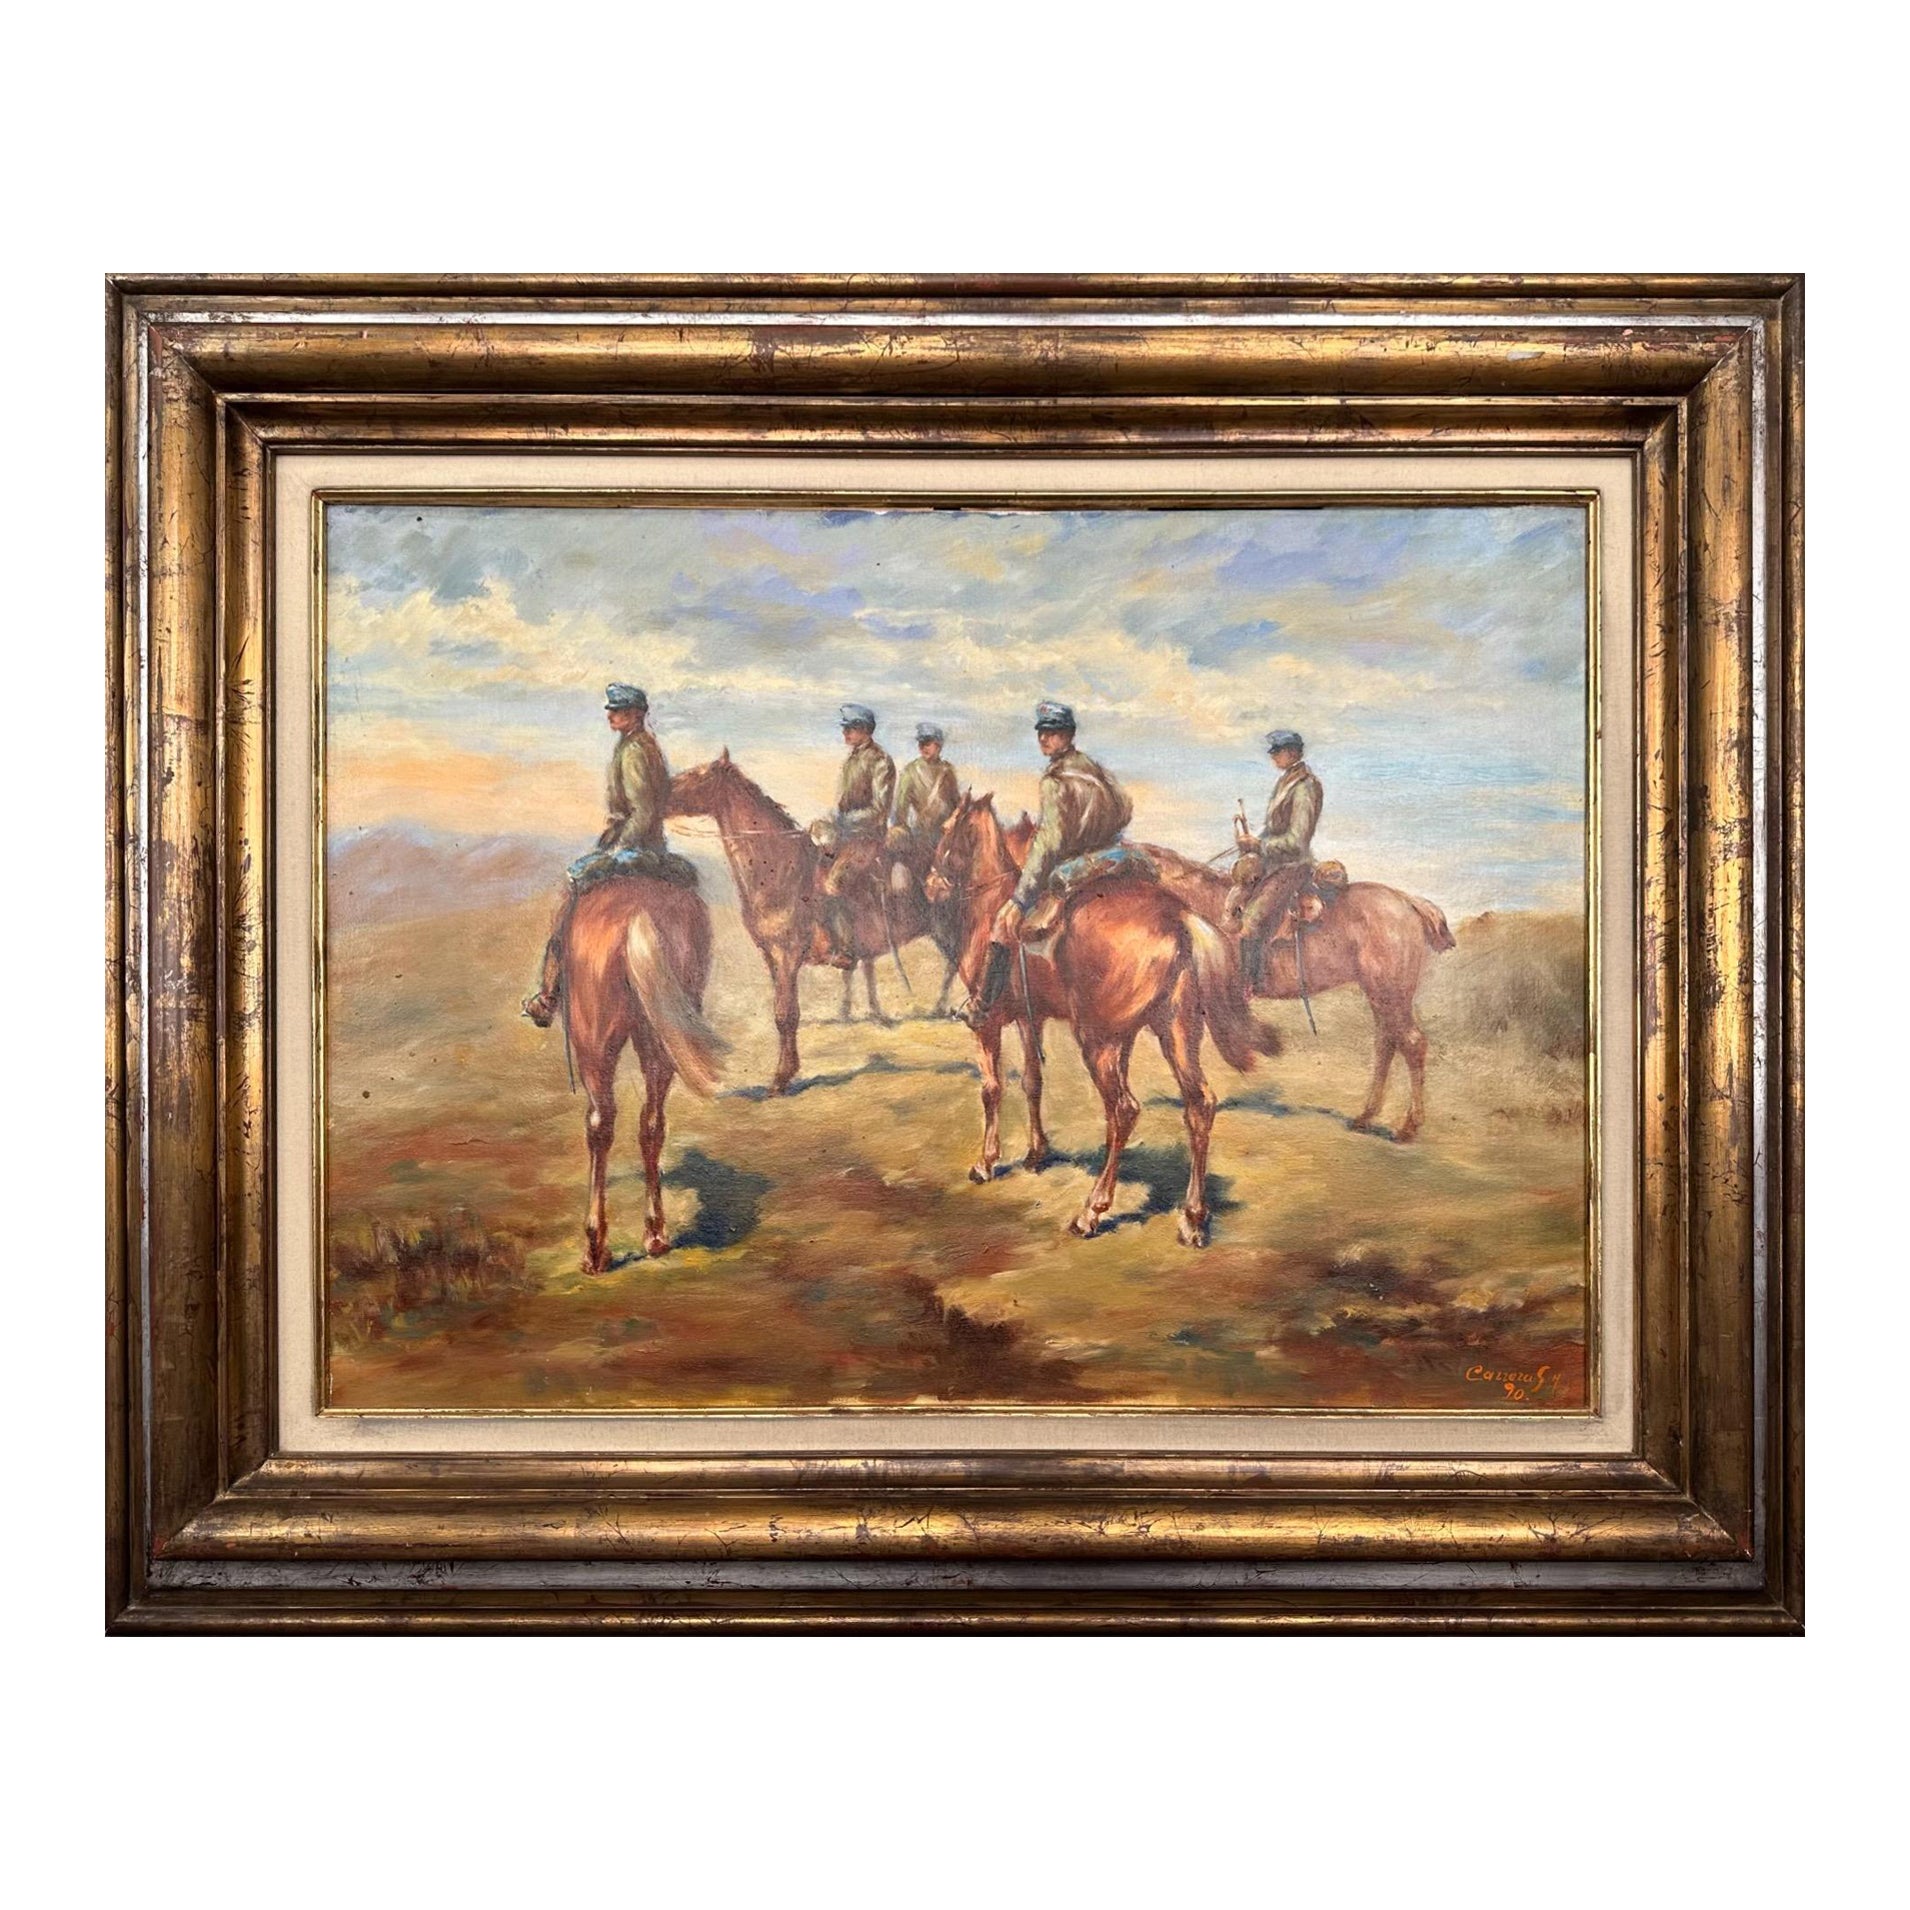 Oil Painting of a group of strangers in the desert with their horses